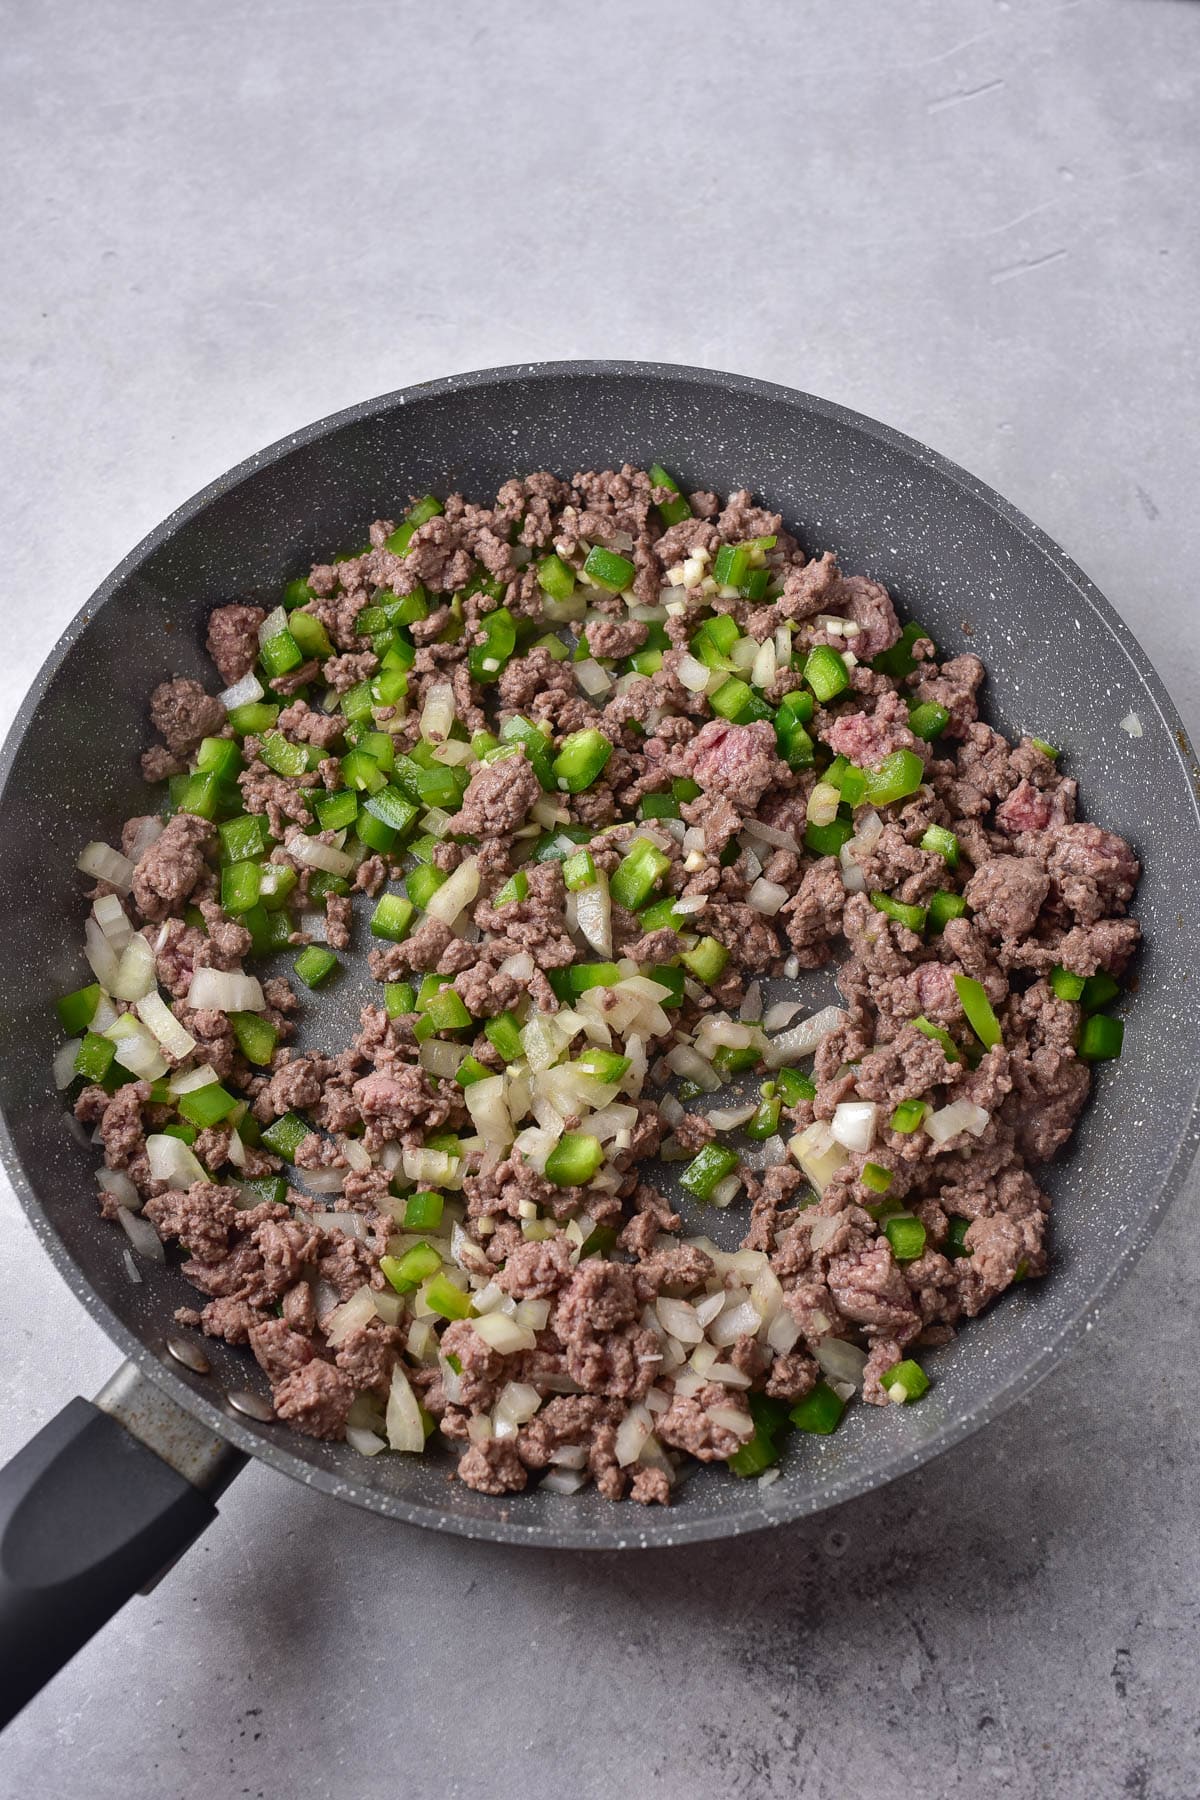 Ground beef in a skillet with onions, garlic, and peppers.